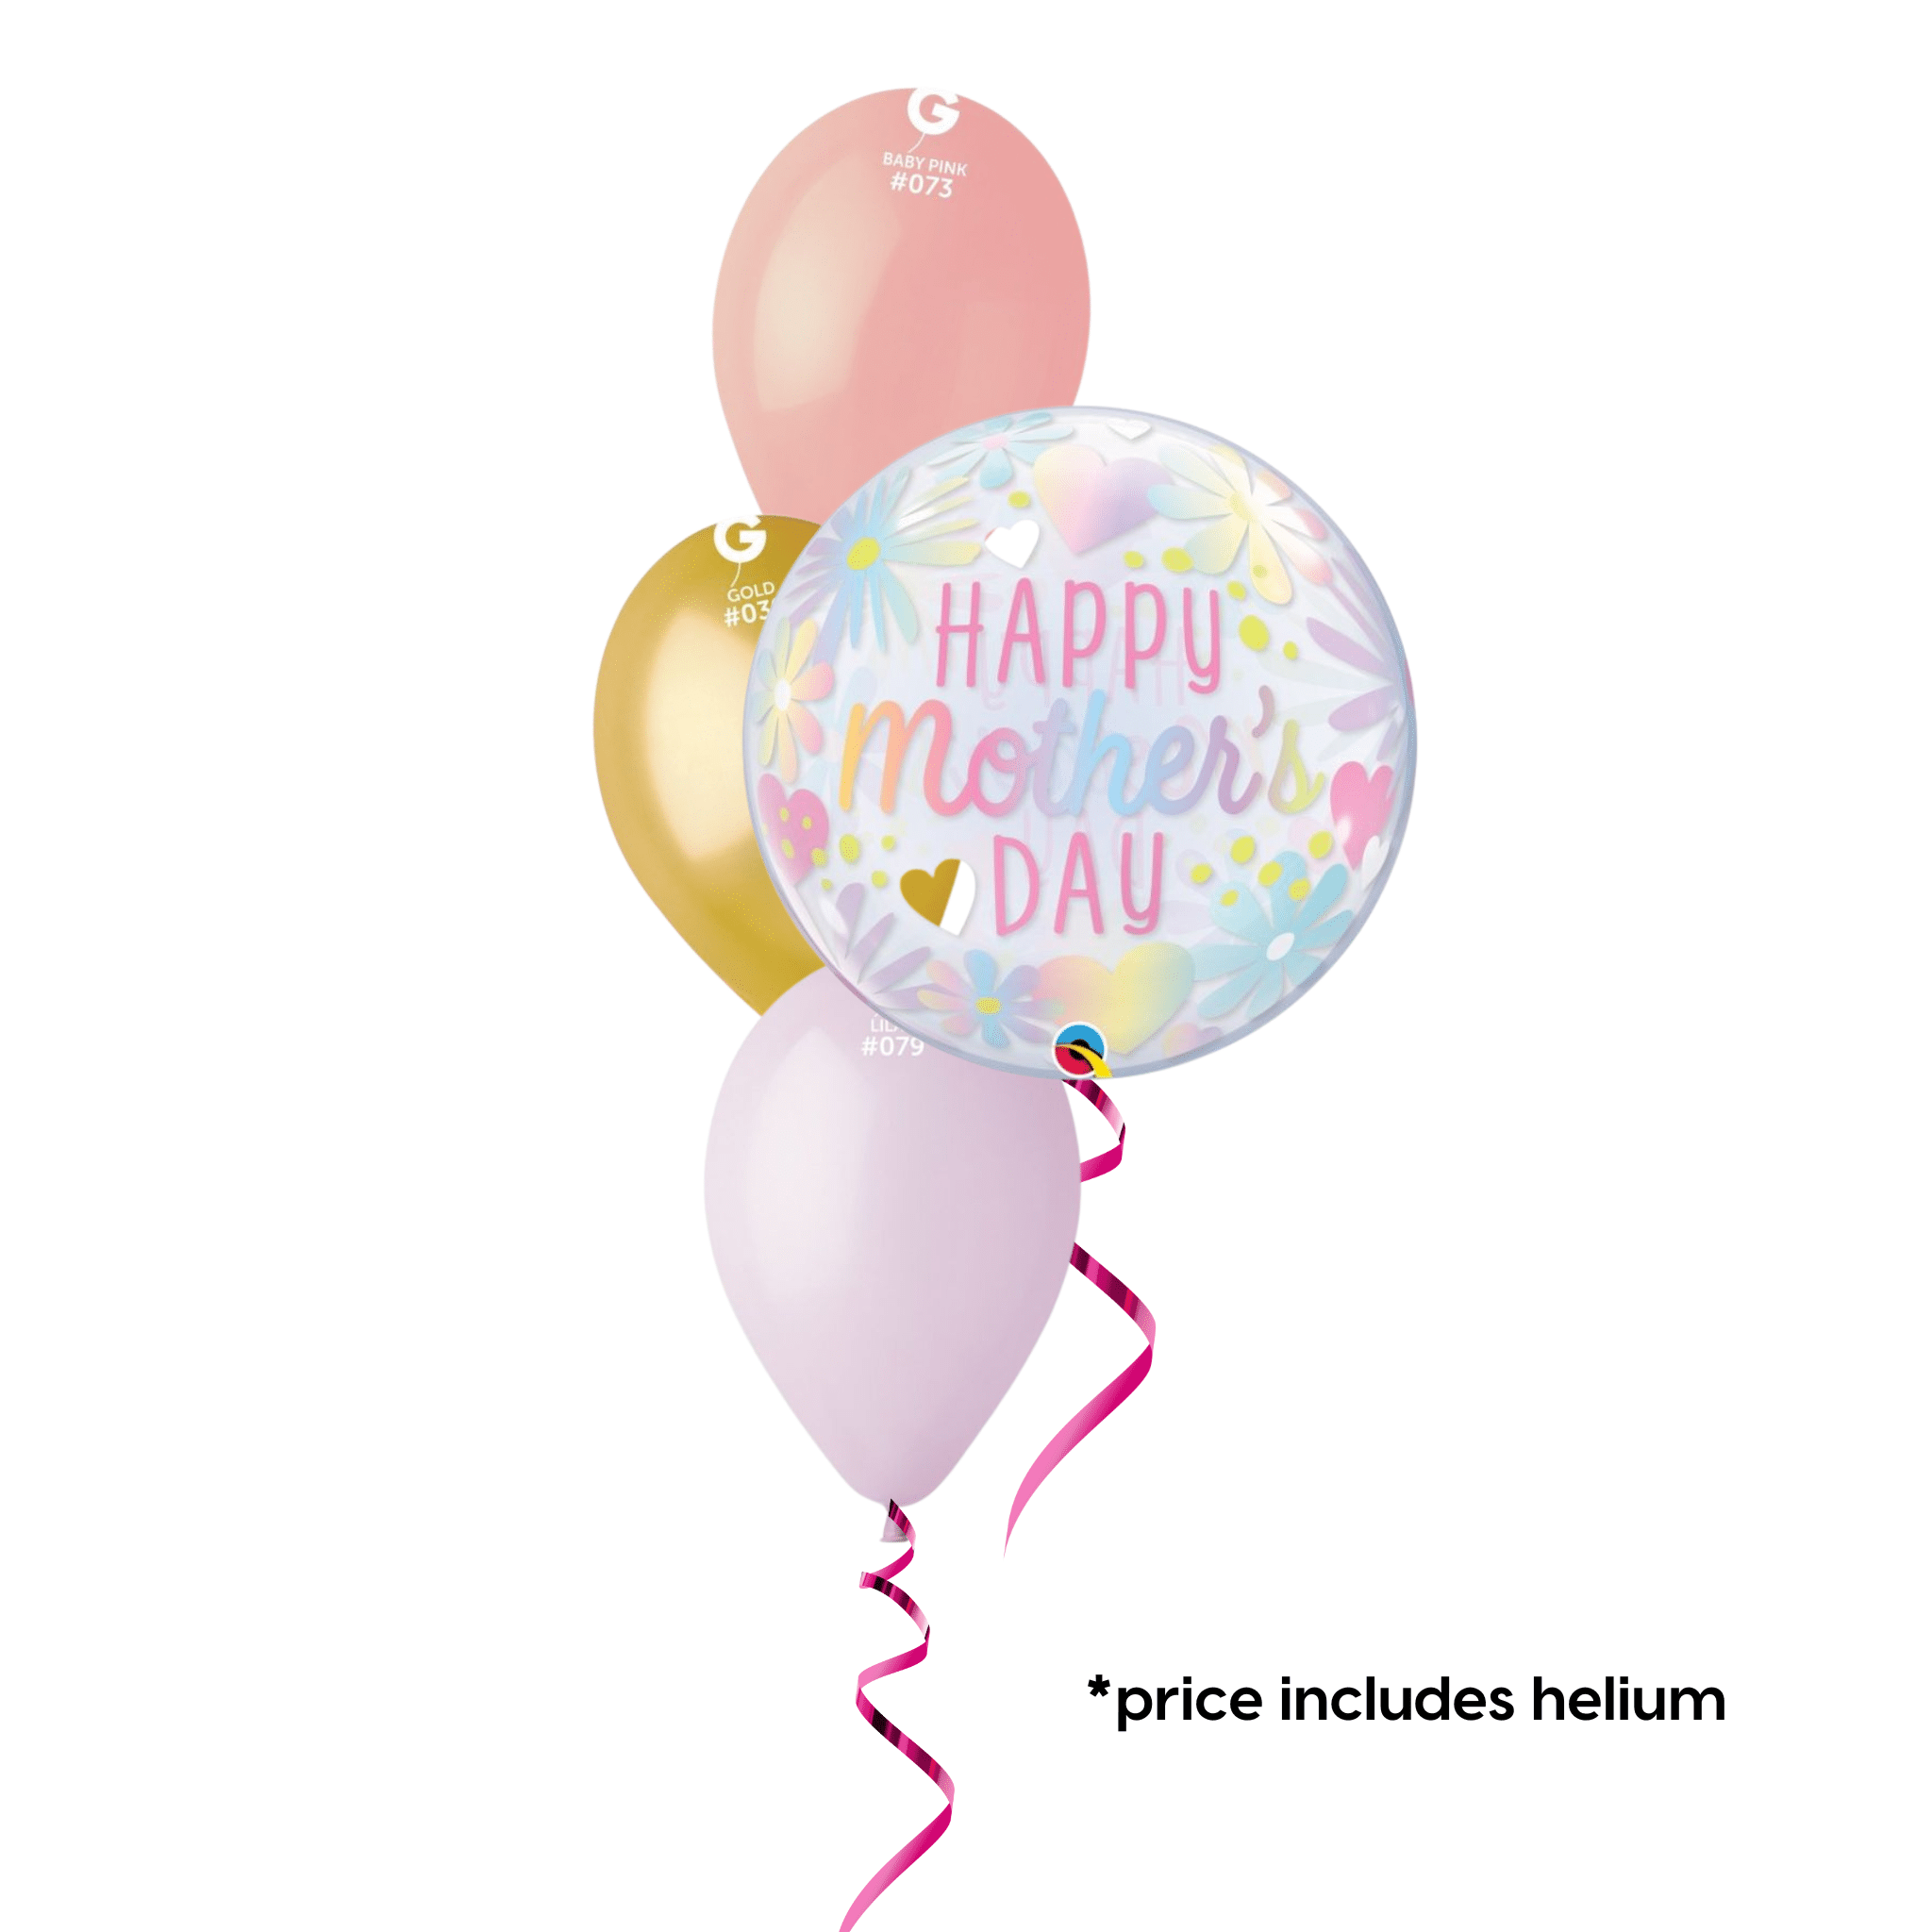 Happy Mothers Day - Luxury Pastel Balloon Bouquet | The Party Hut